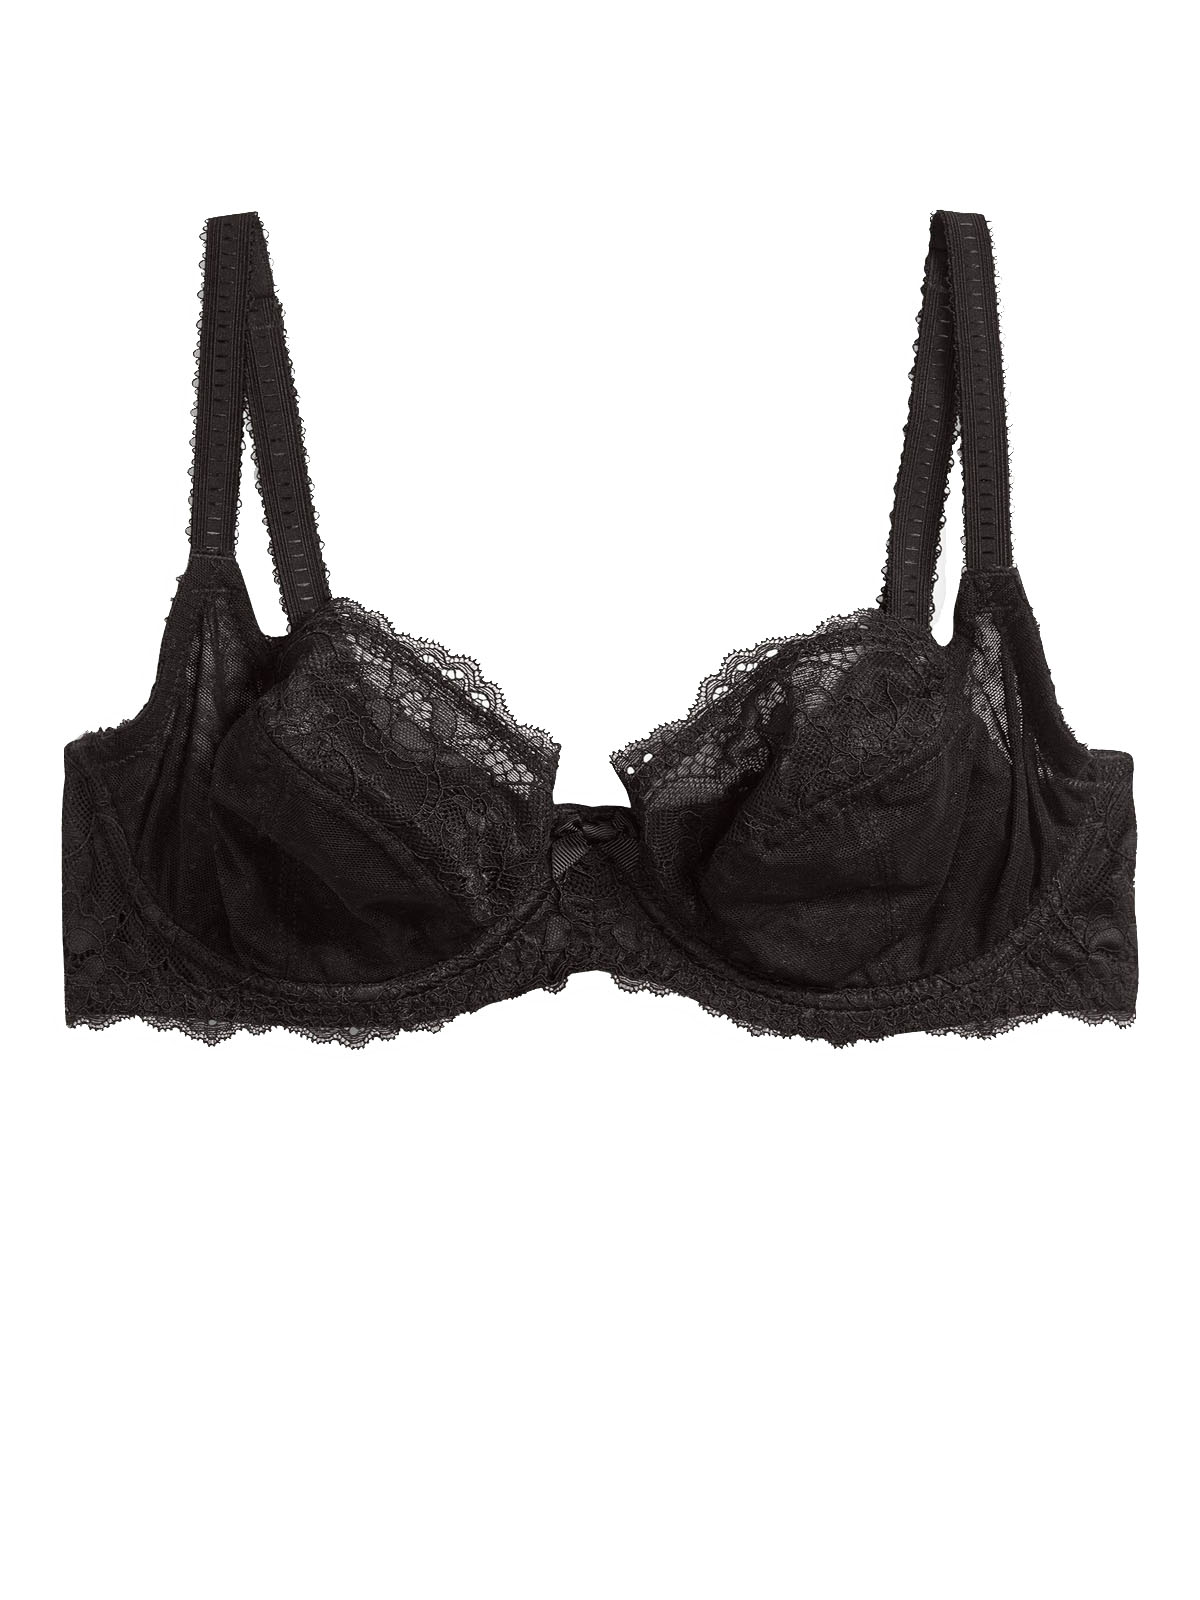 N3XT BLACK Floral Lace Non-Padded Balcony Bra - Size 32 to 38 (DD-F-G)